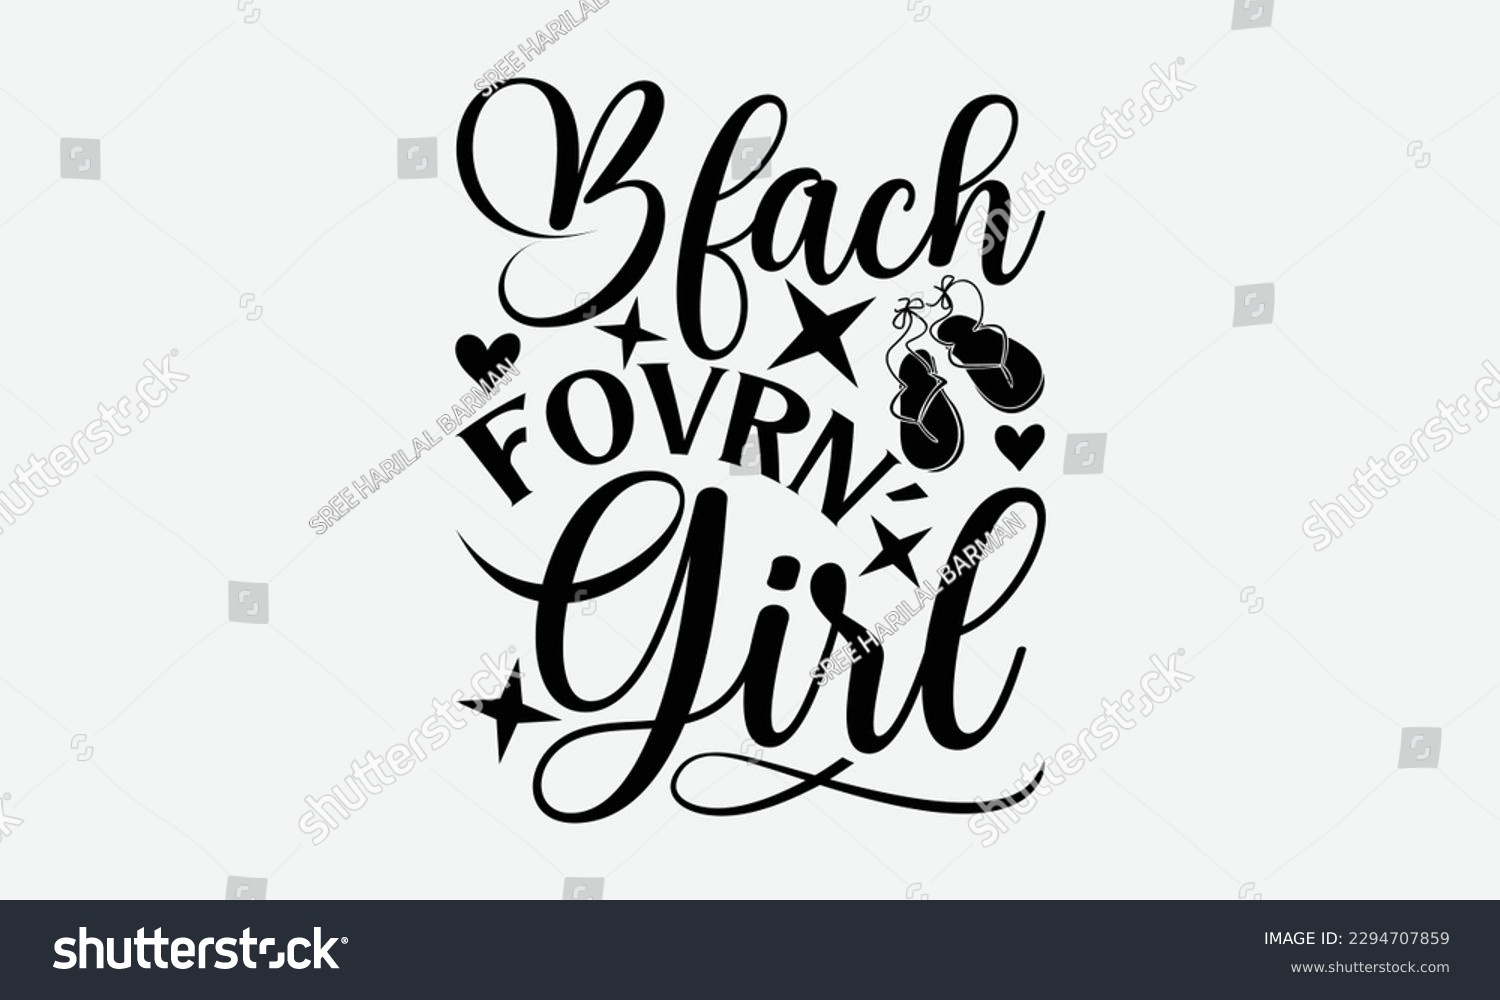 SVG of Bfach fovrn’ girl - Summer Svg typography t-shirt design, Hand drawn lettering phrase, Greeting cards, templates, mugs, templates,  posters,  stickers, eps 10. svg